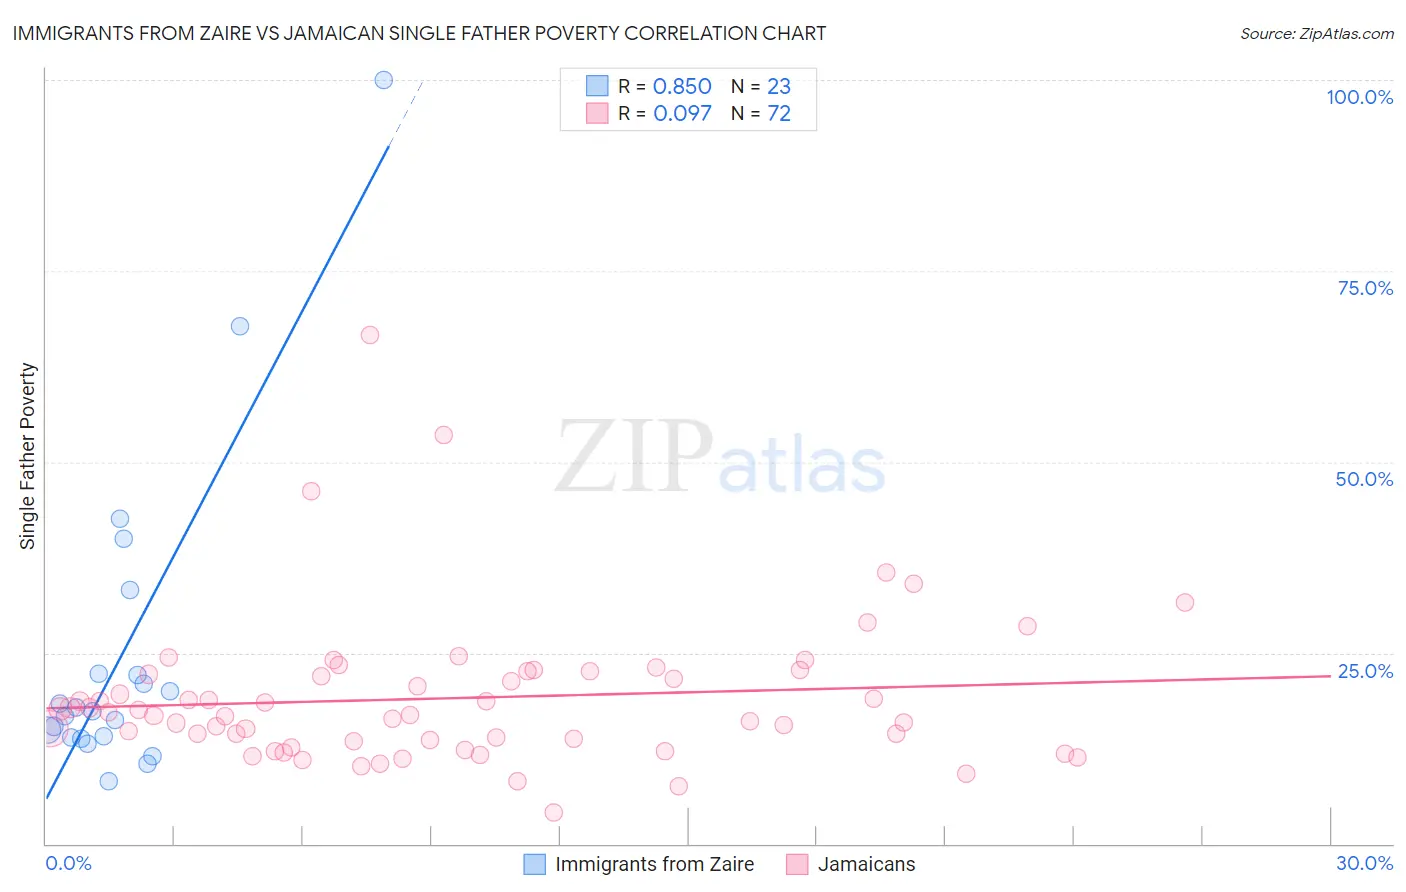 Immigrants from Zaire vs Jamaican Single Father Poverty